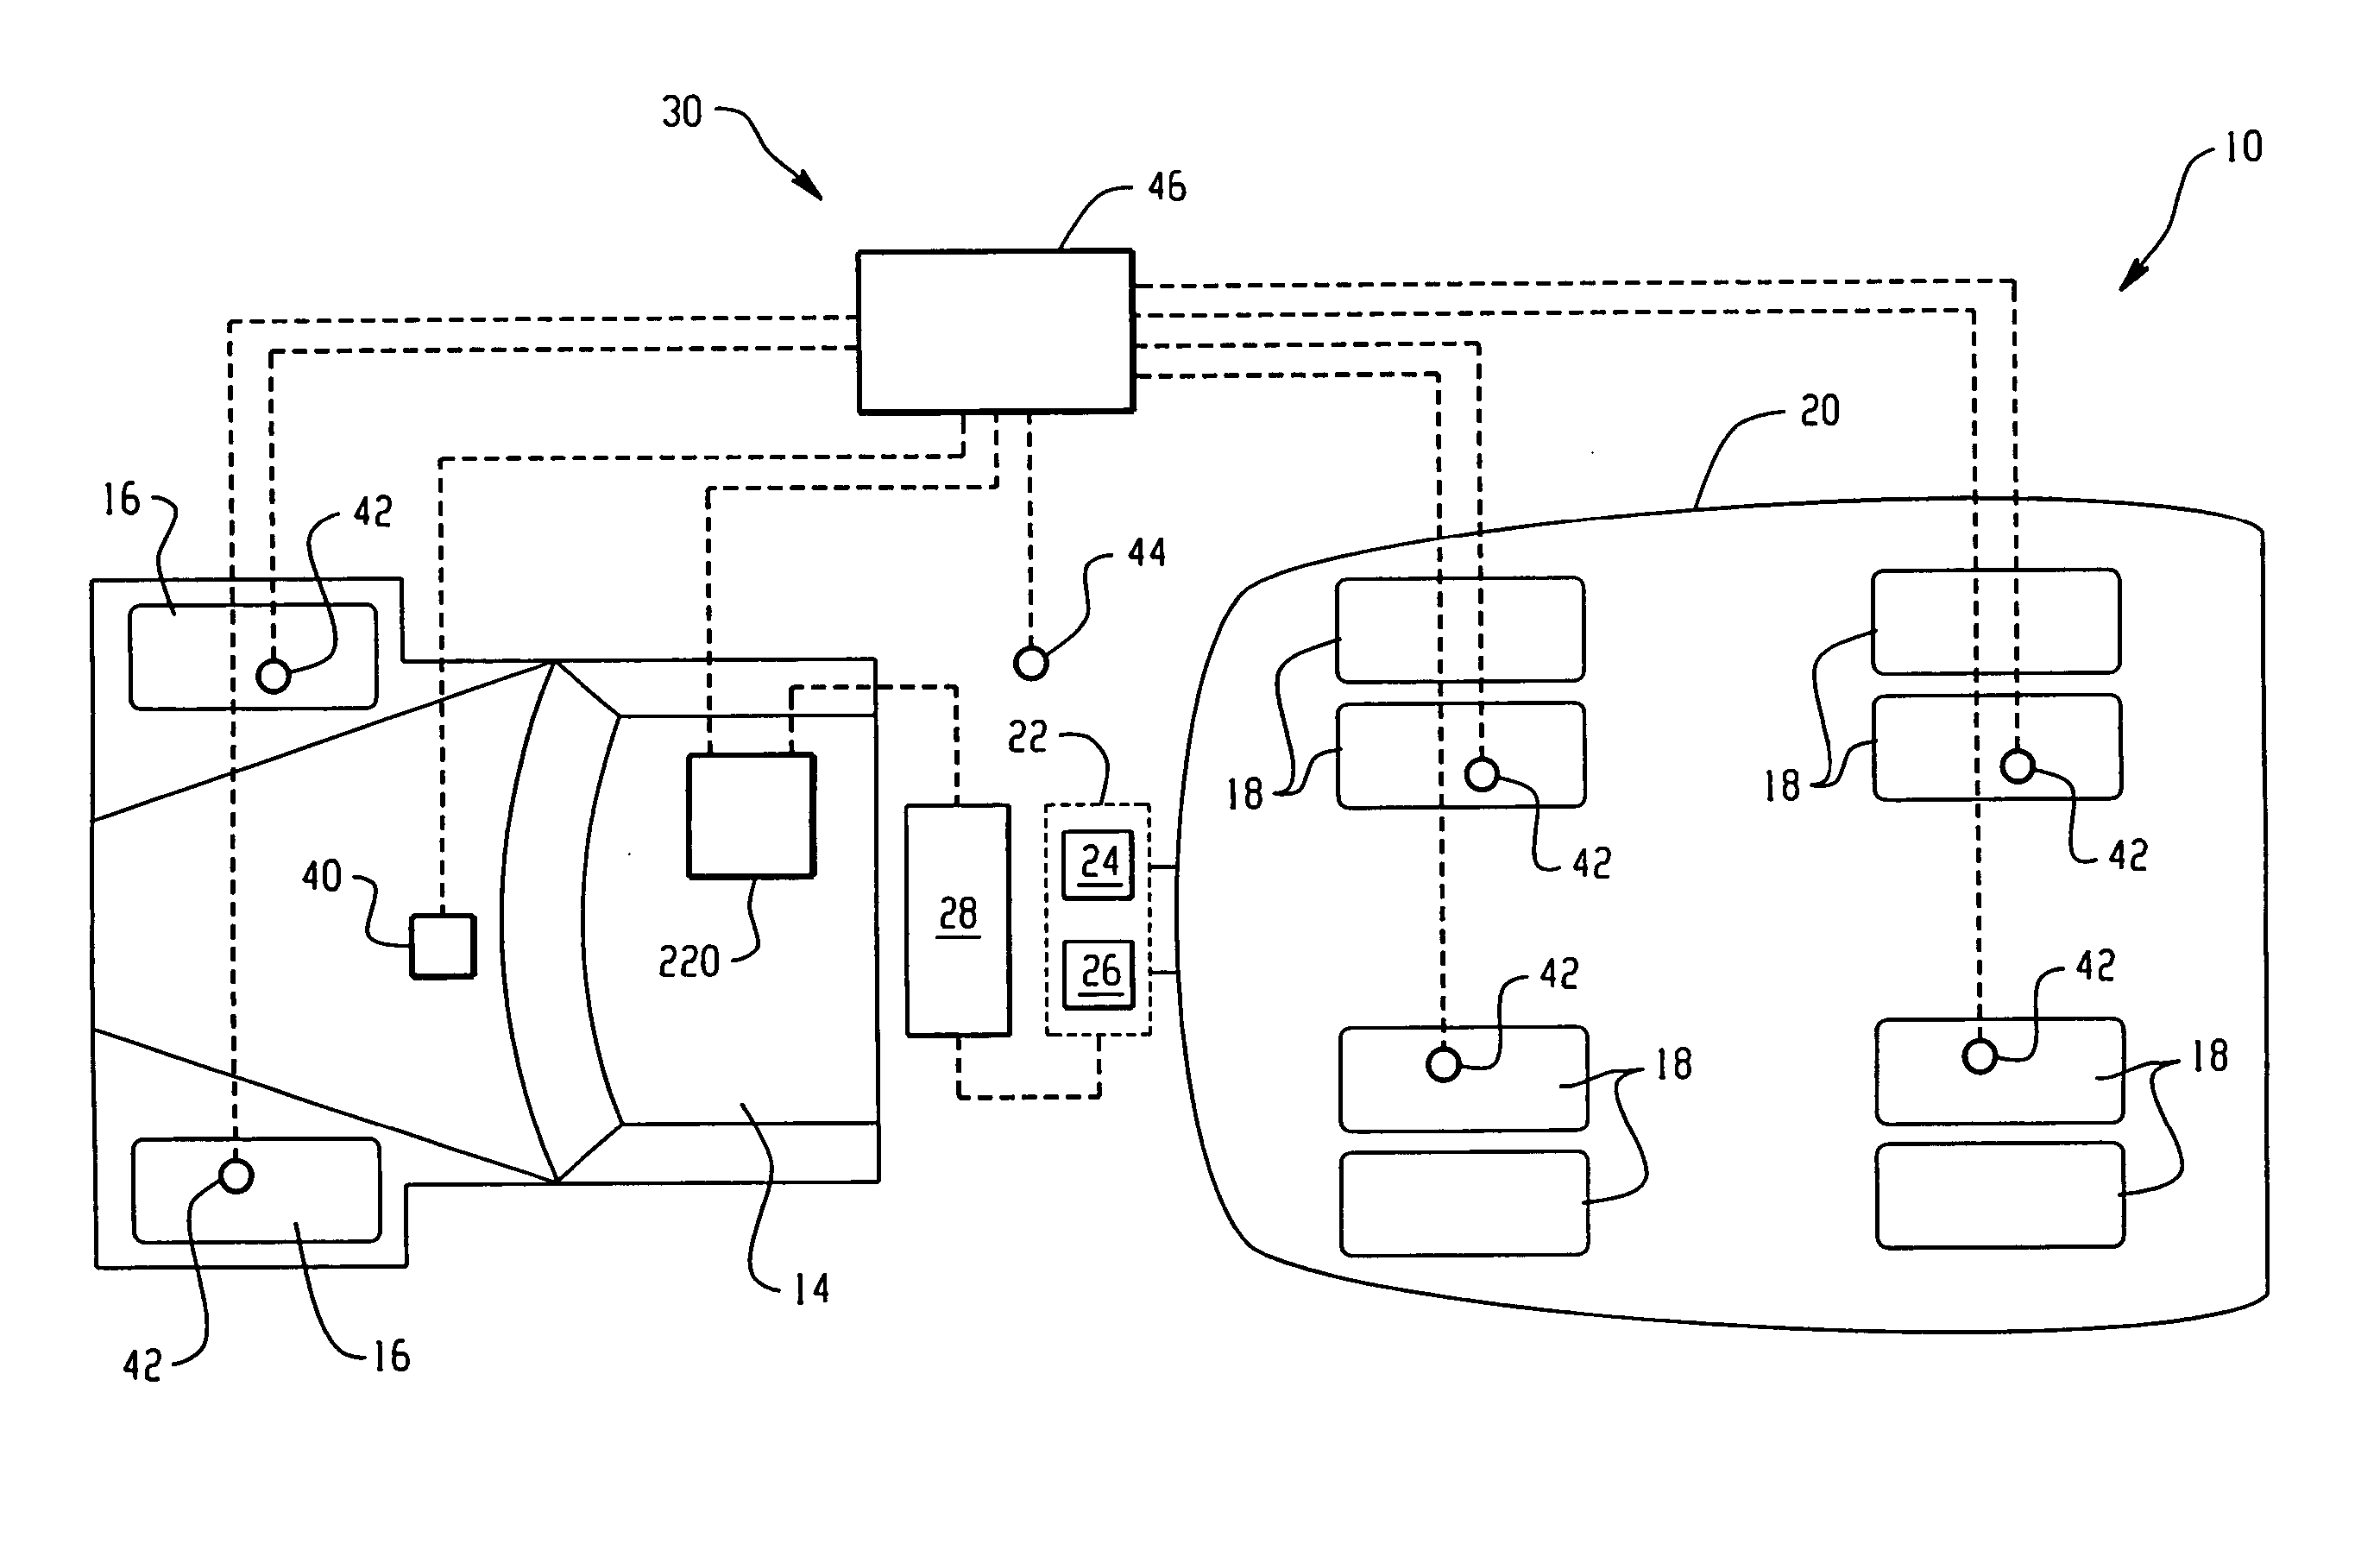 Arrangement for improving the operational performance of cement mixing truck